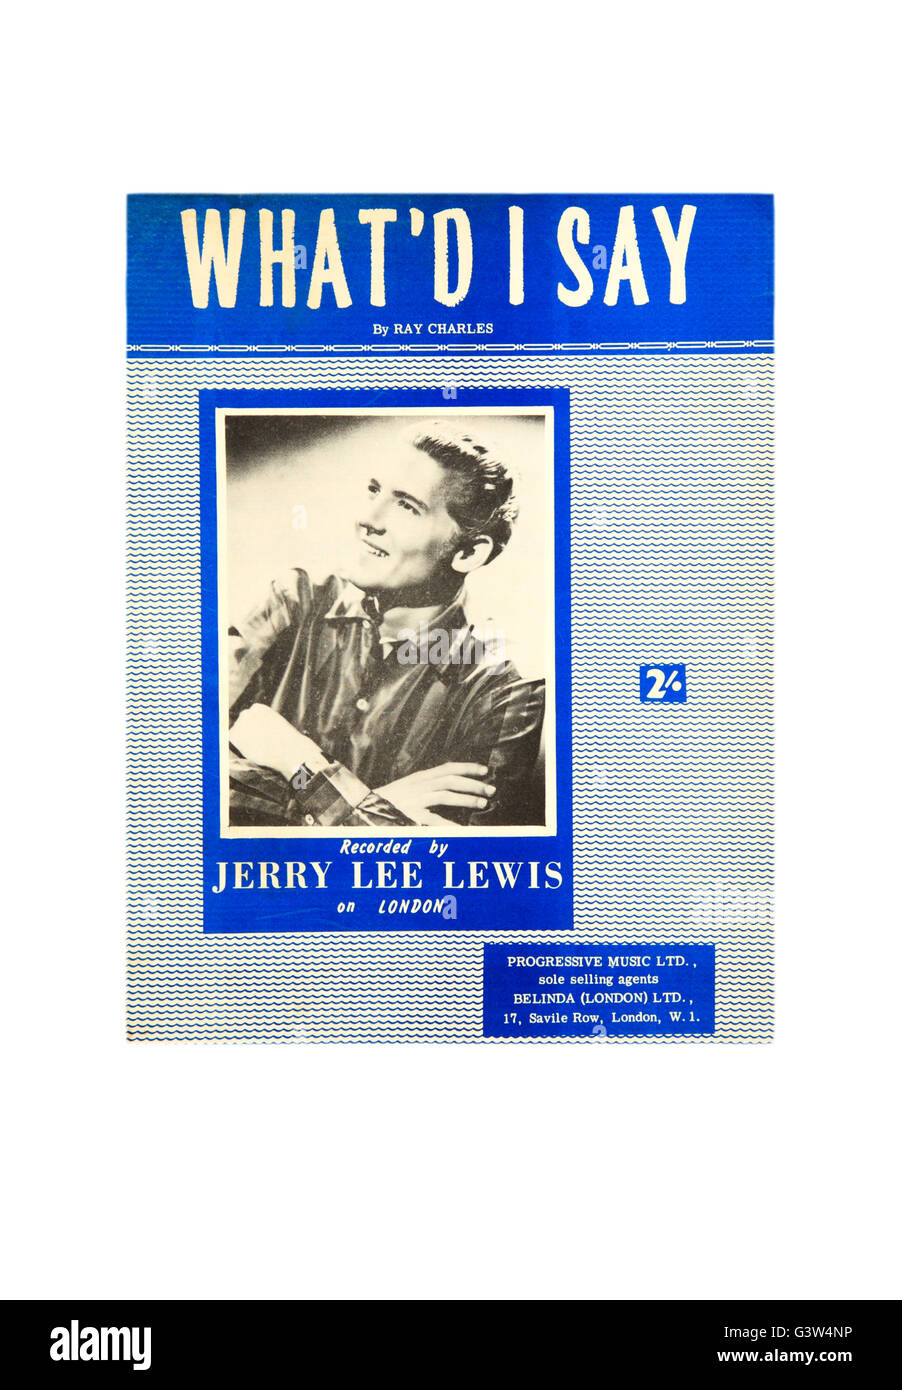 A sheet music cove for What'd I Say by Jerry Lee Lewis. Stock Photo